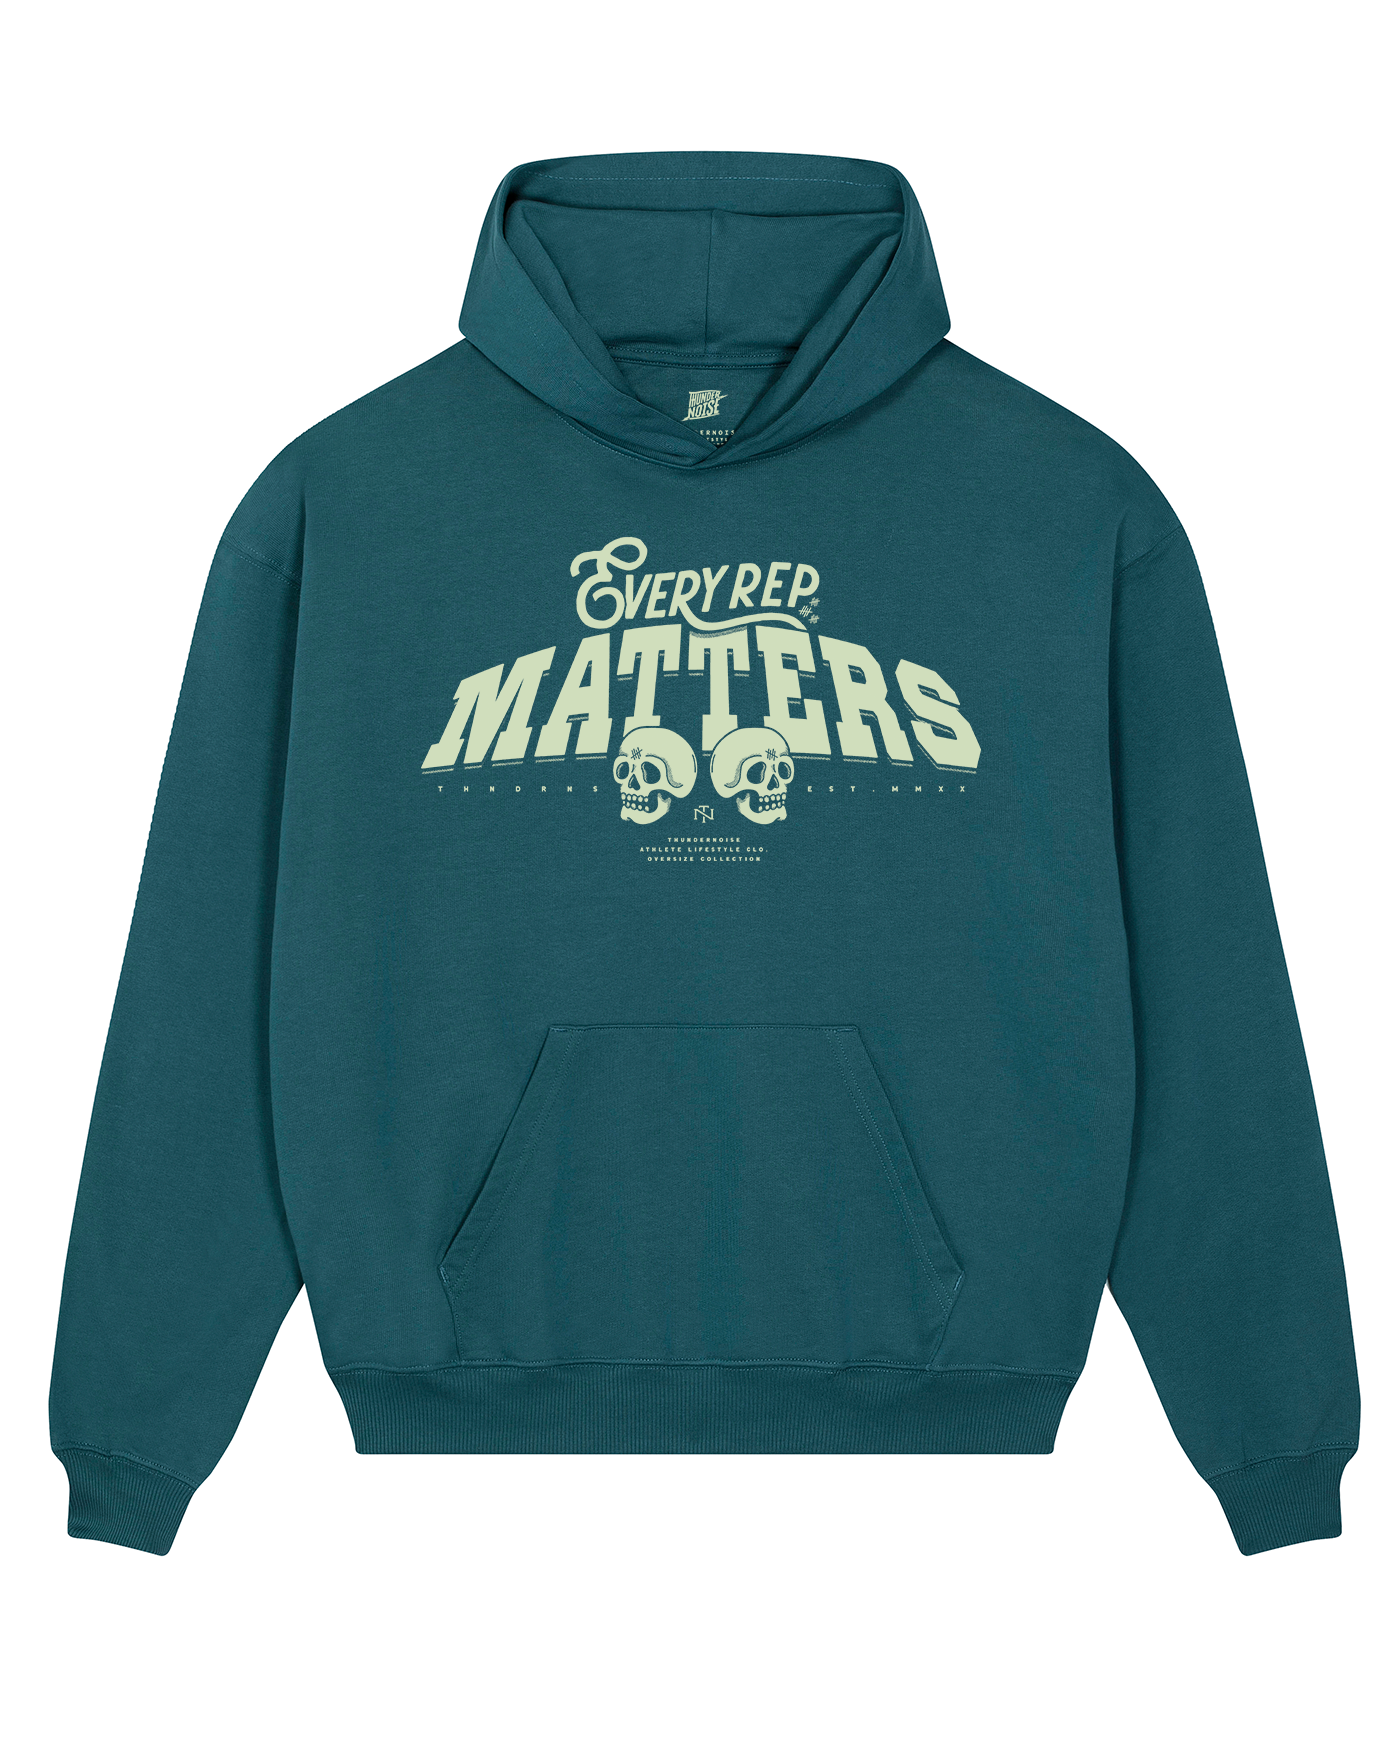 Every Rep Matters Oversize Hoodie - Green Petrol